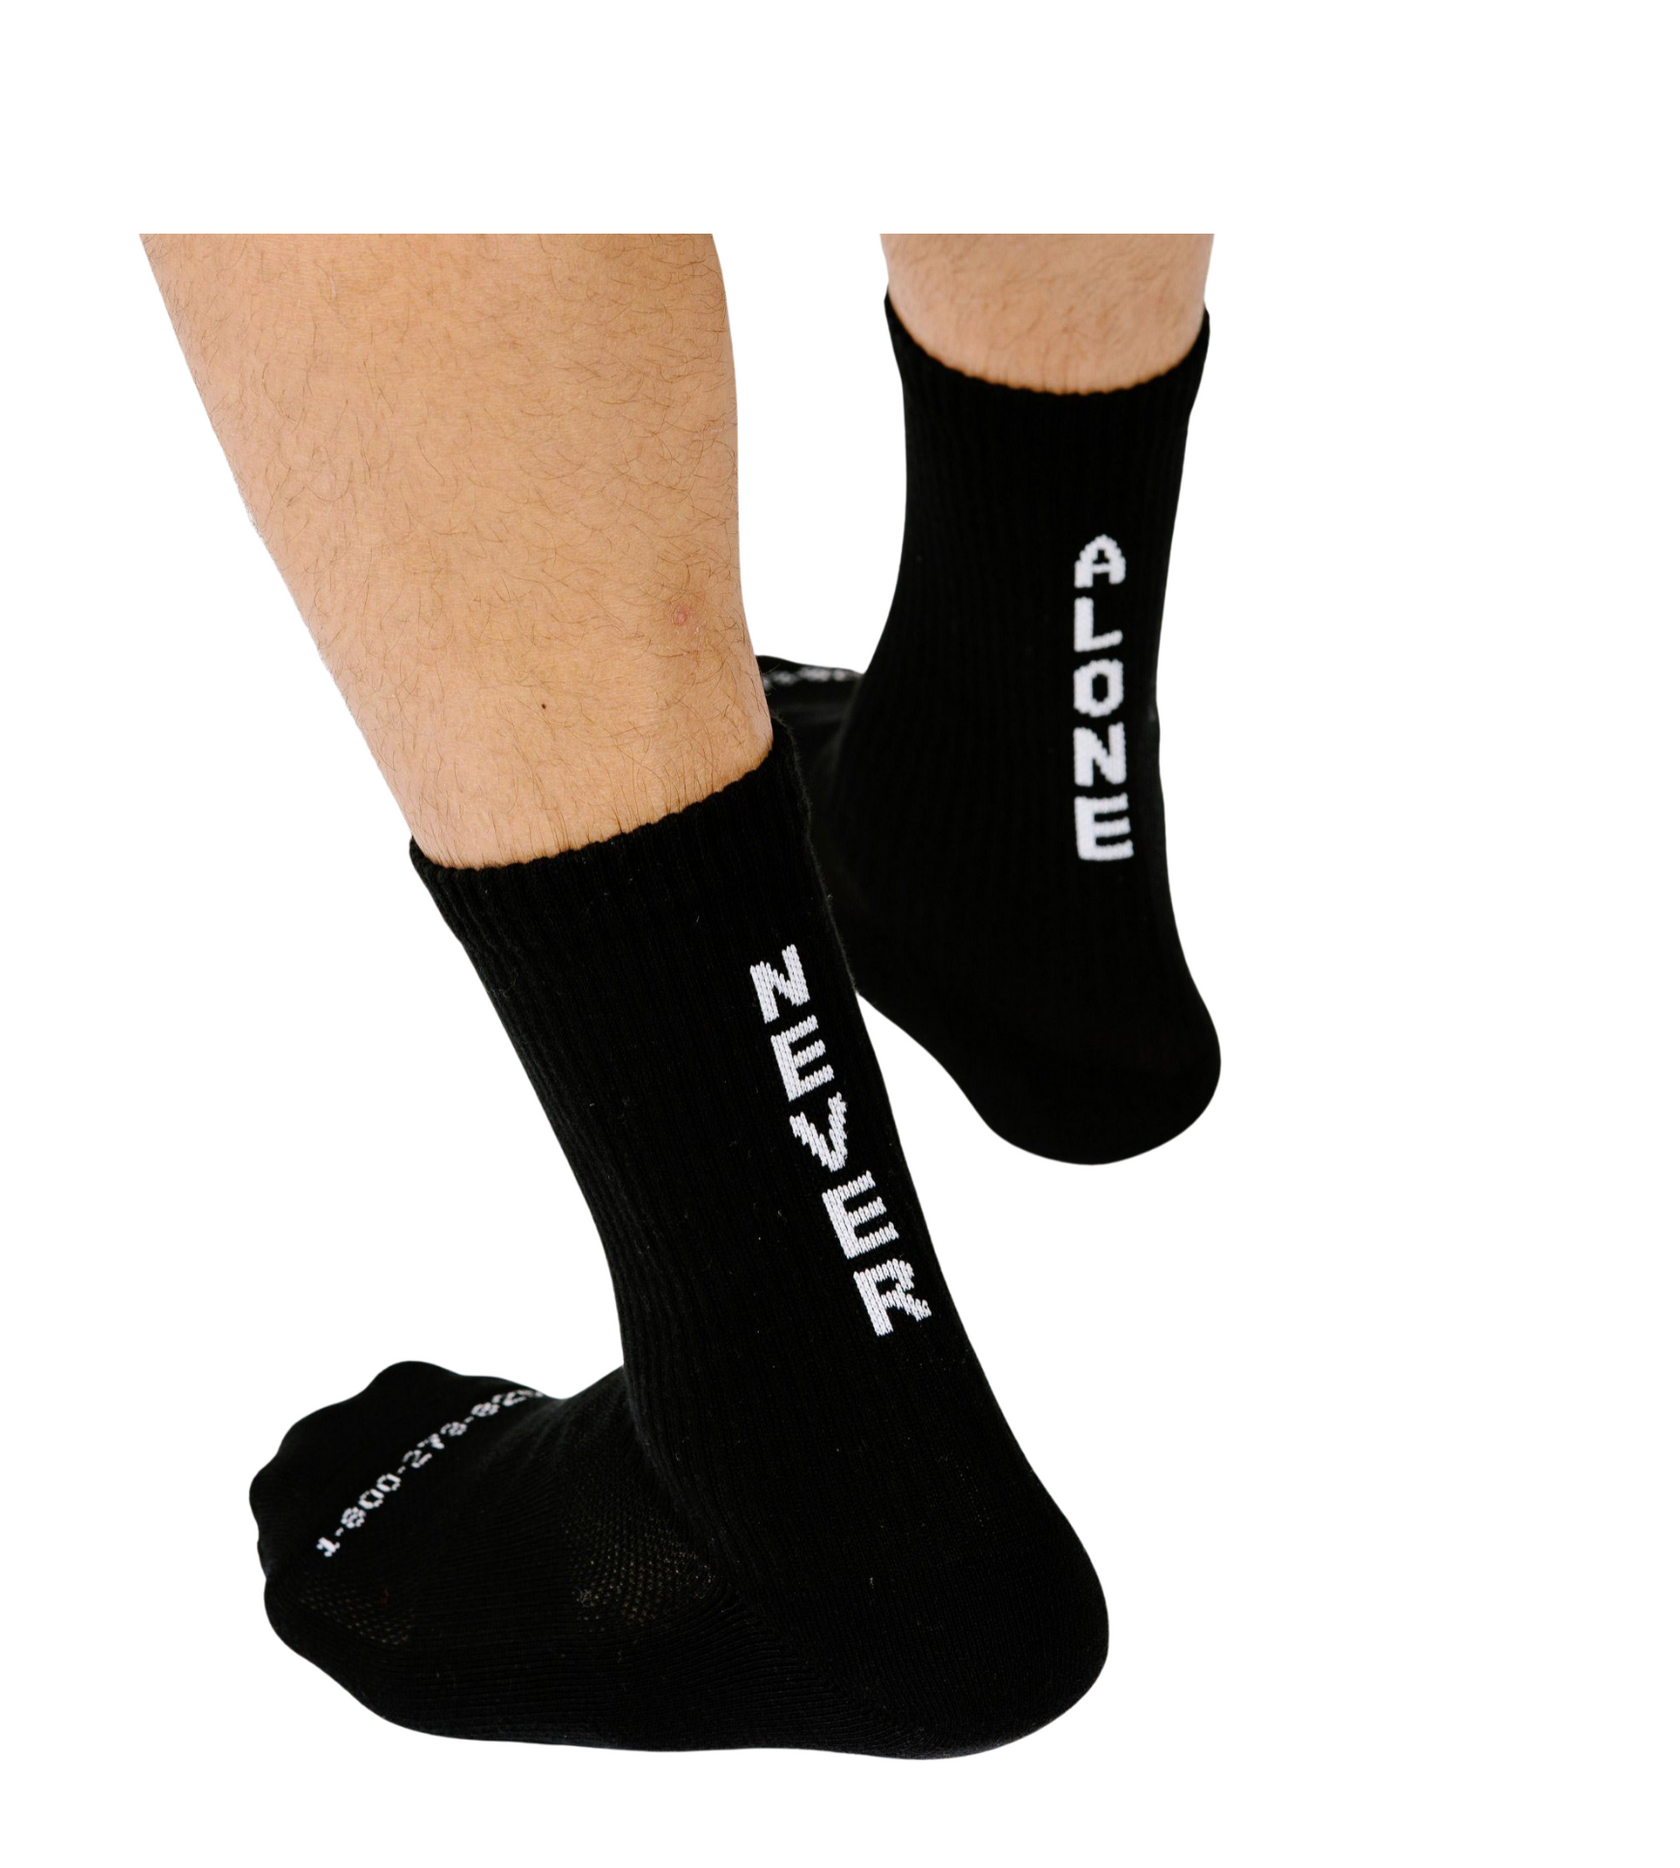 Never Alone In Black Cushion Crew Socks – Pair of Thieves